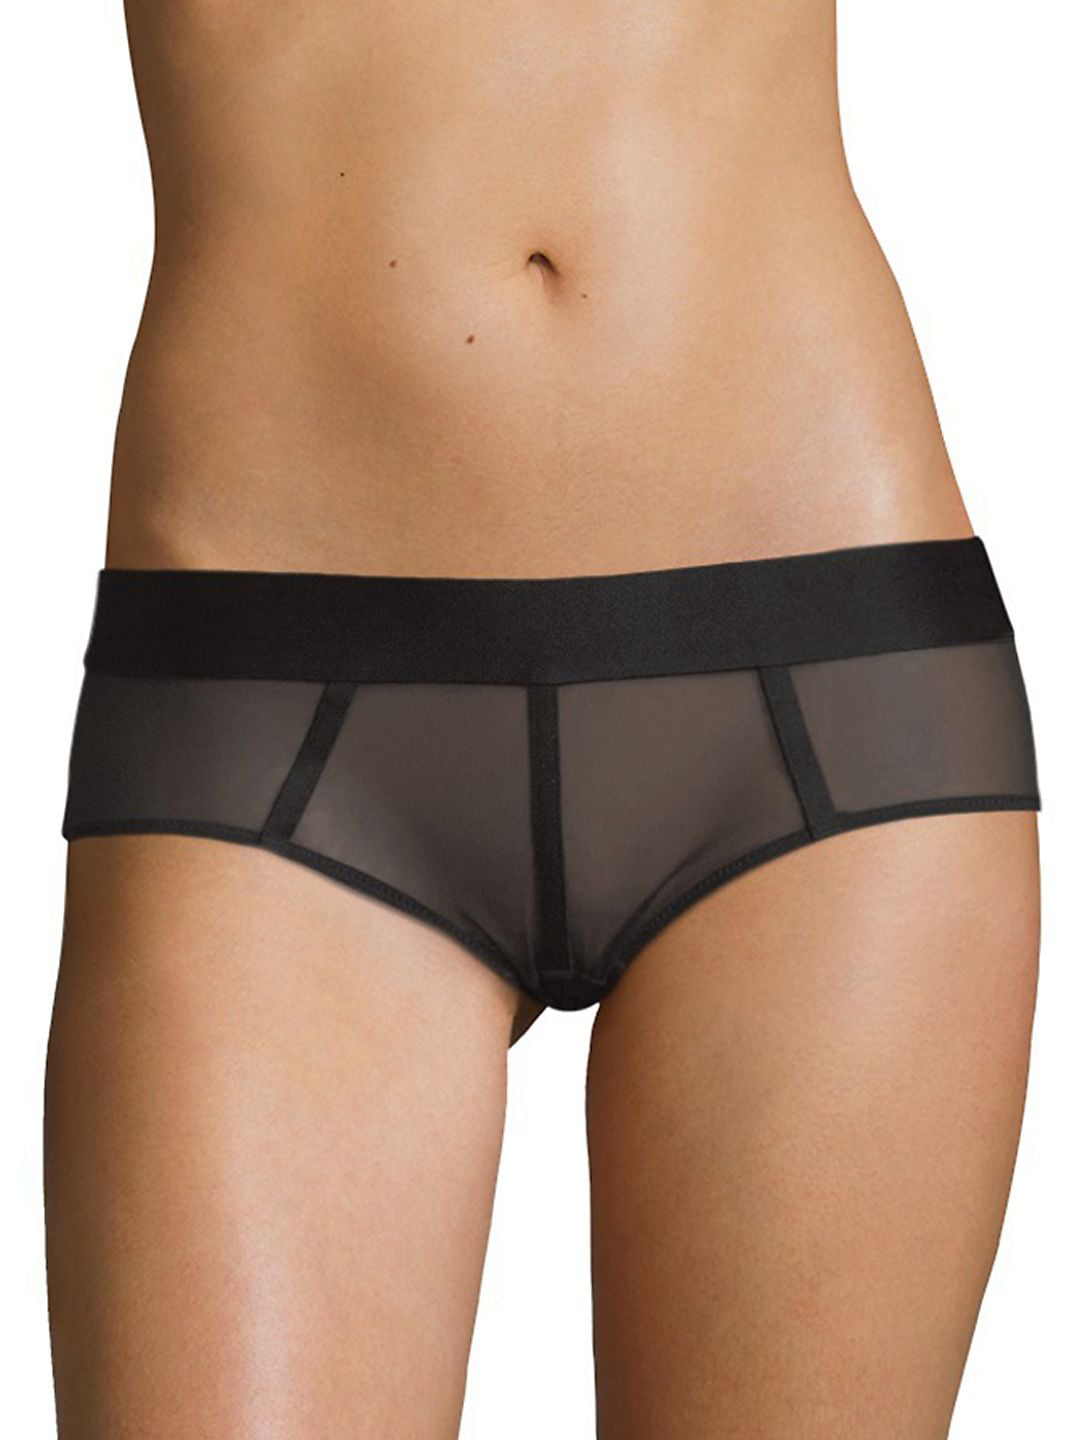 DKNY Womens Sheers Hipster Panty Hipster Panties